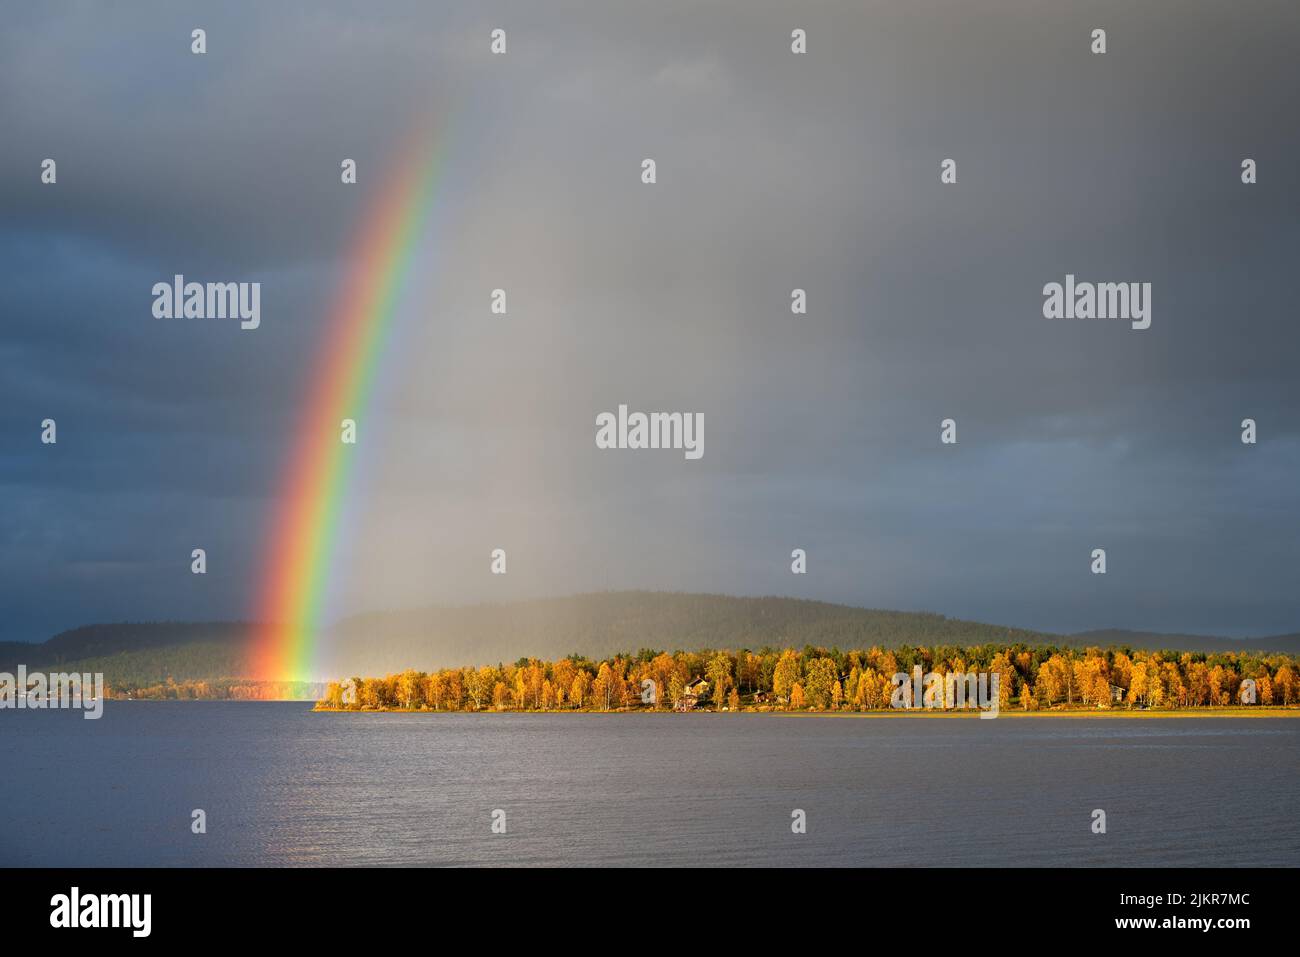 Rainbow over the autumn landscape, dramatic sky and light, forest trees in autumn colors. Lapland, Finland. Stock Photo